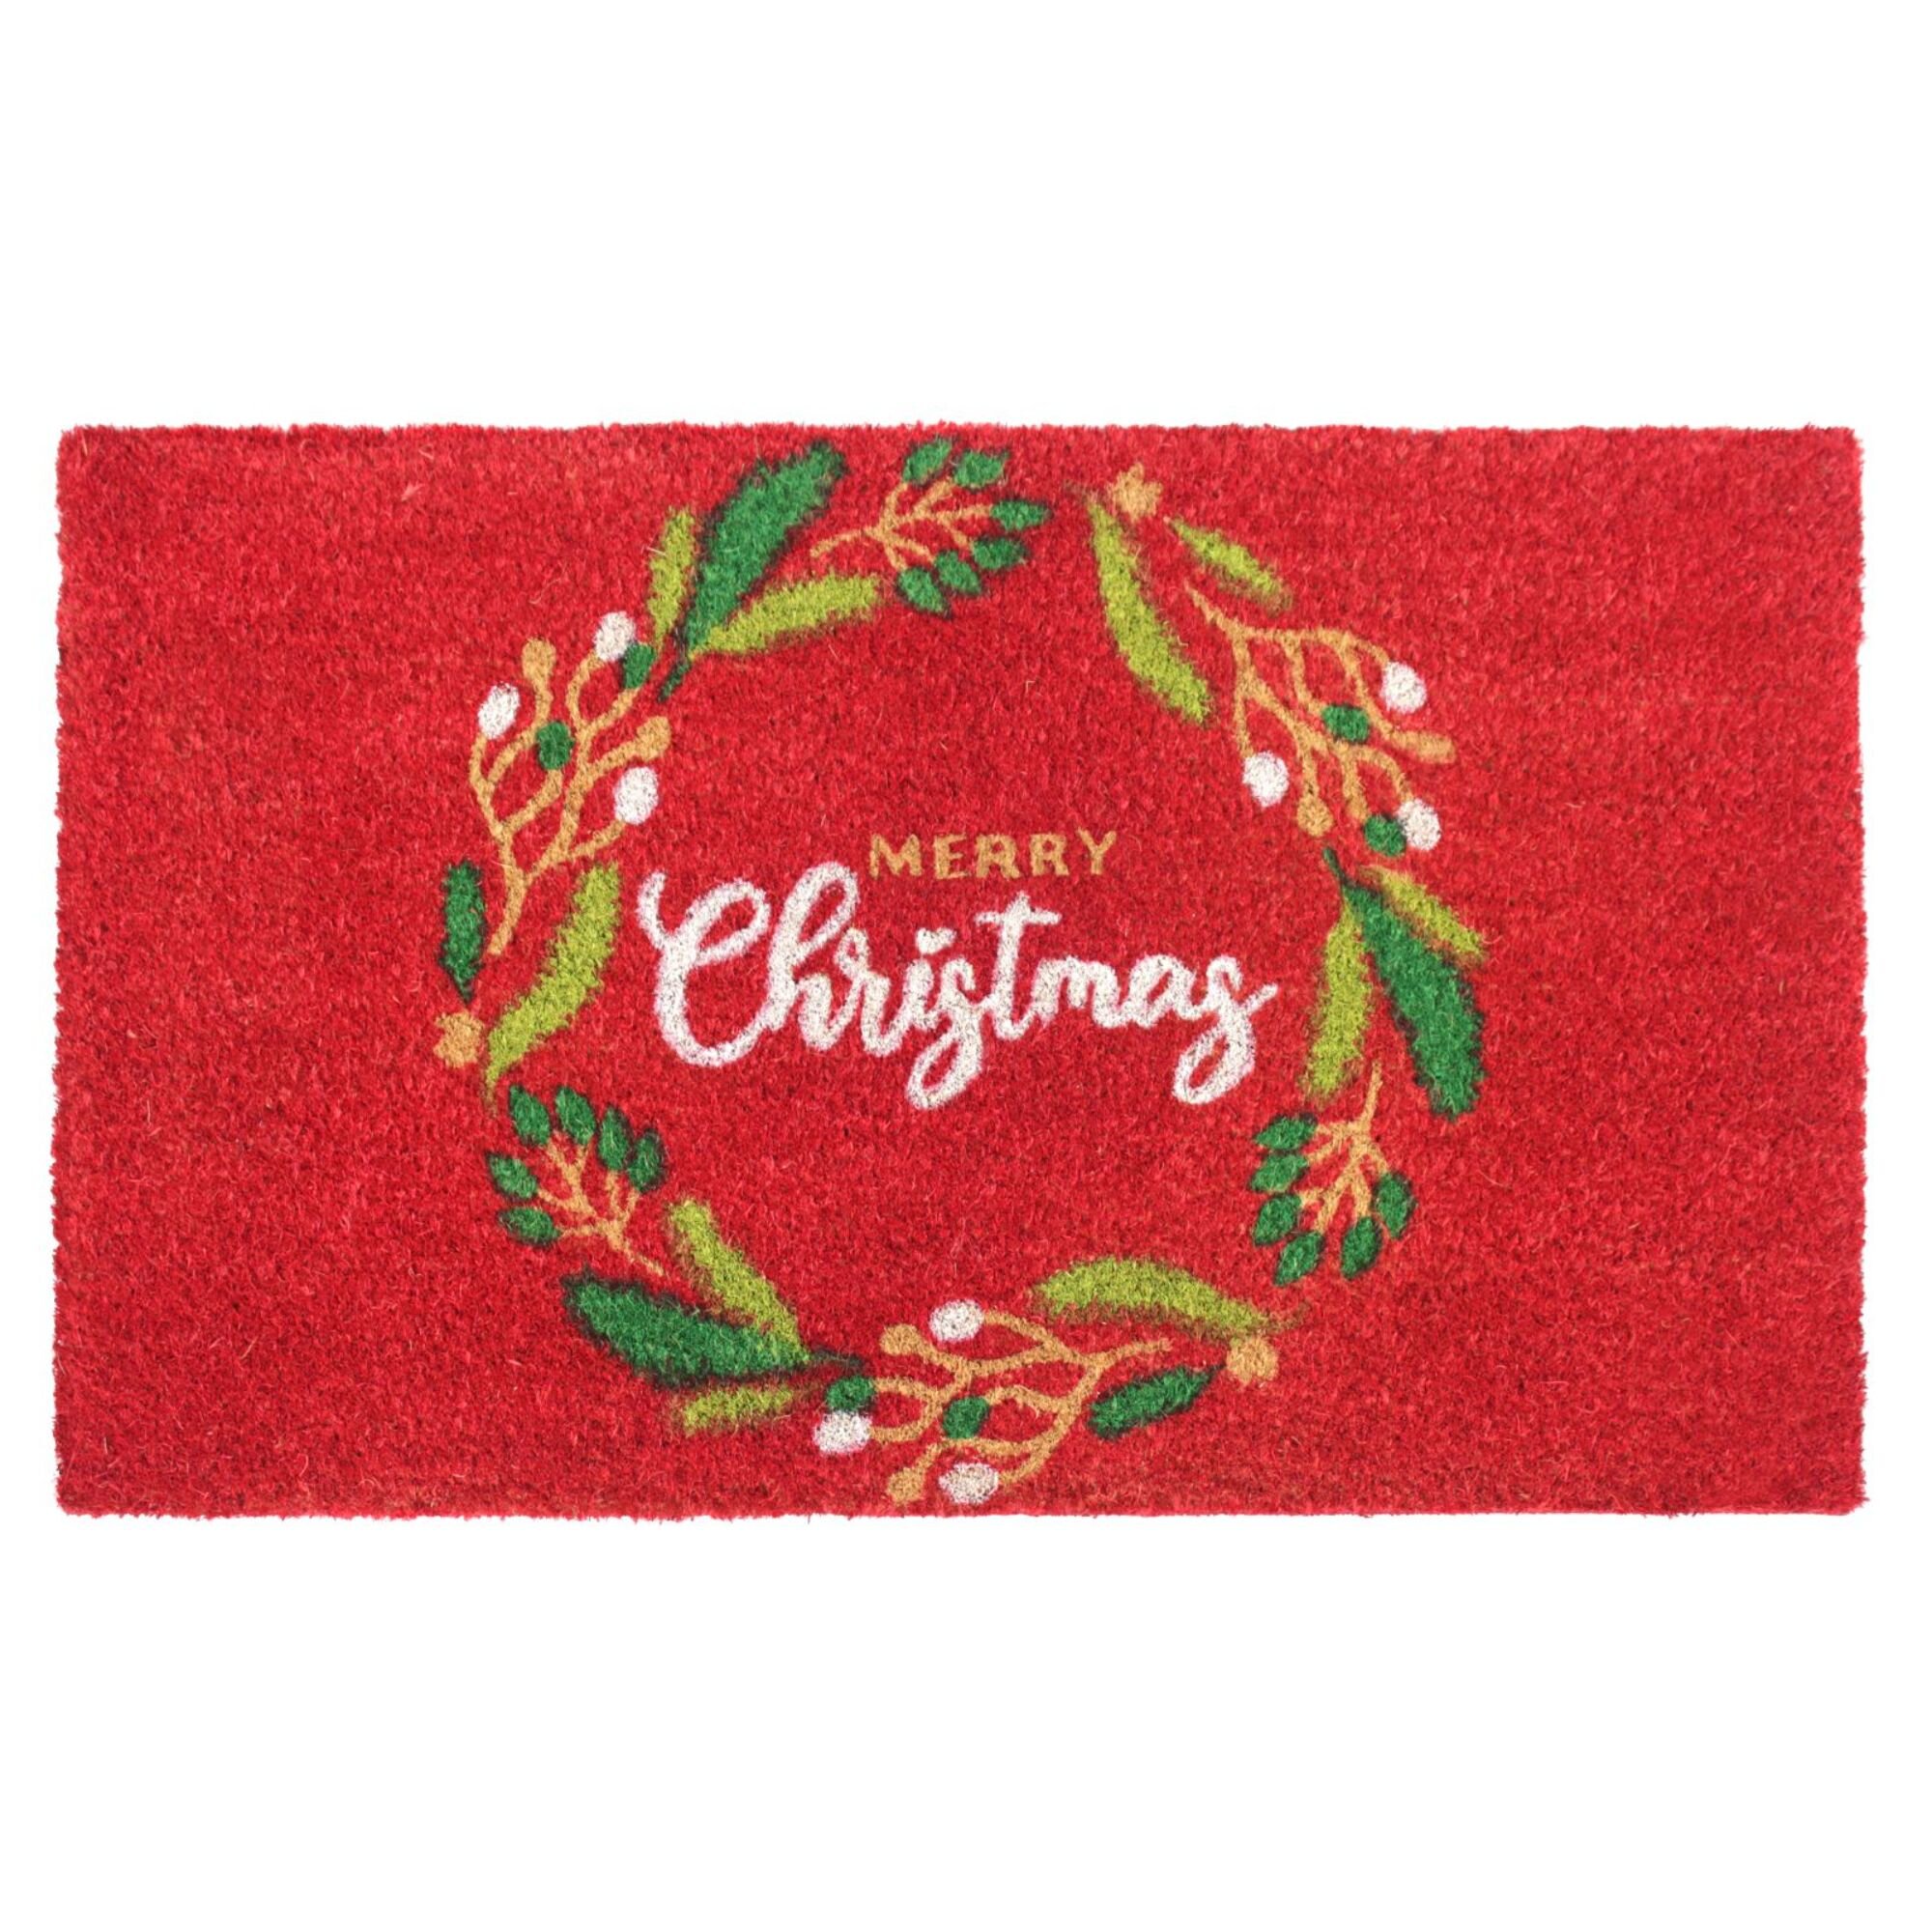 Winter Tree Line Black and Natural Holiday Doormat 18x30 + Reviews